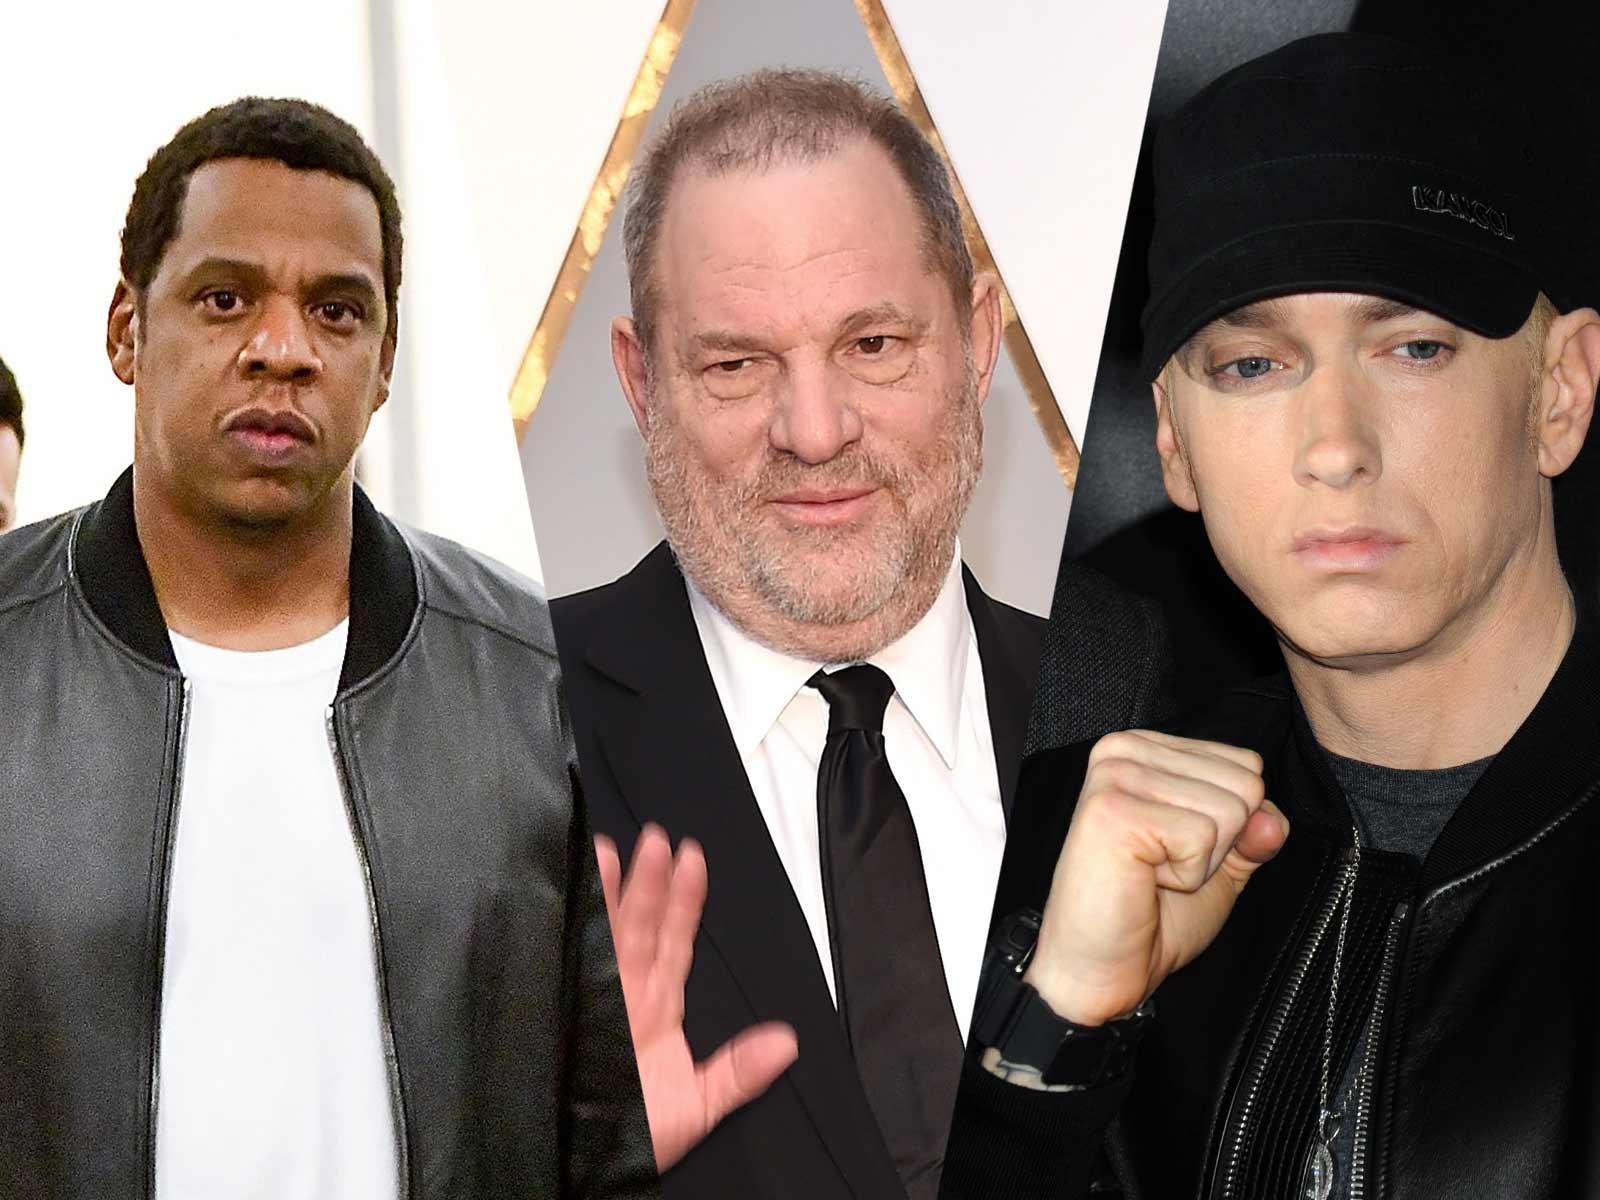 Jay-Z and Eminem the Latest Stars to Go After The Weinstein Company for Money